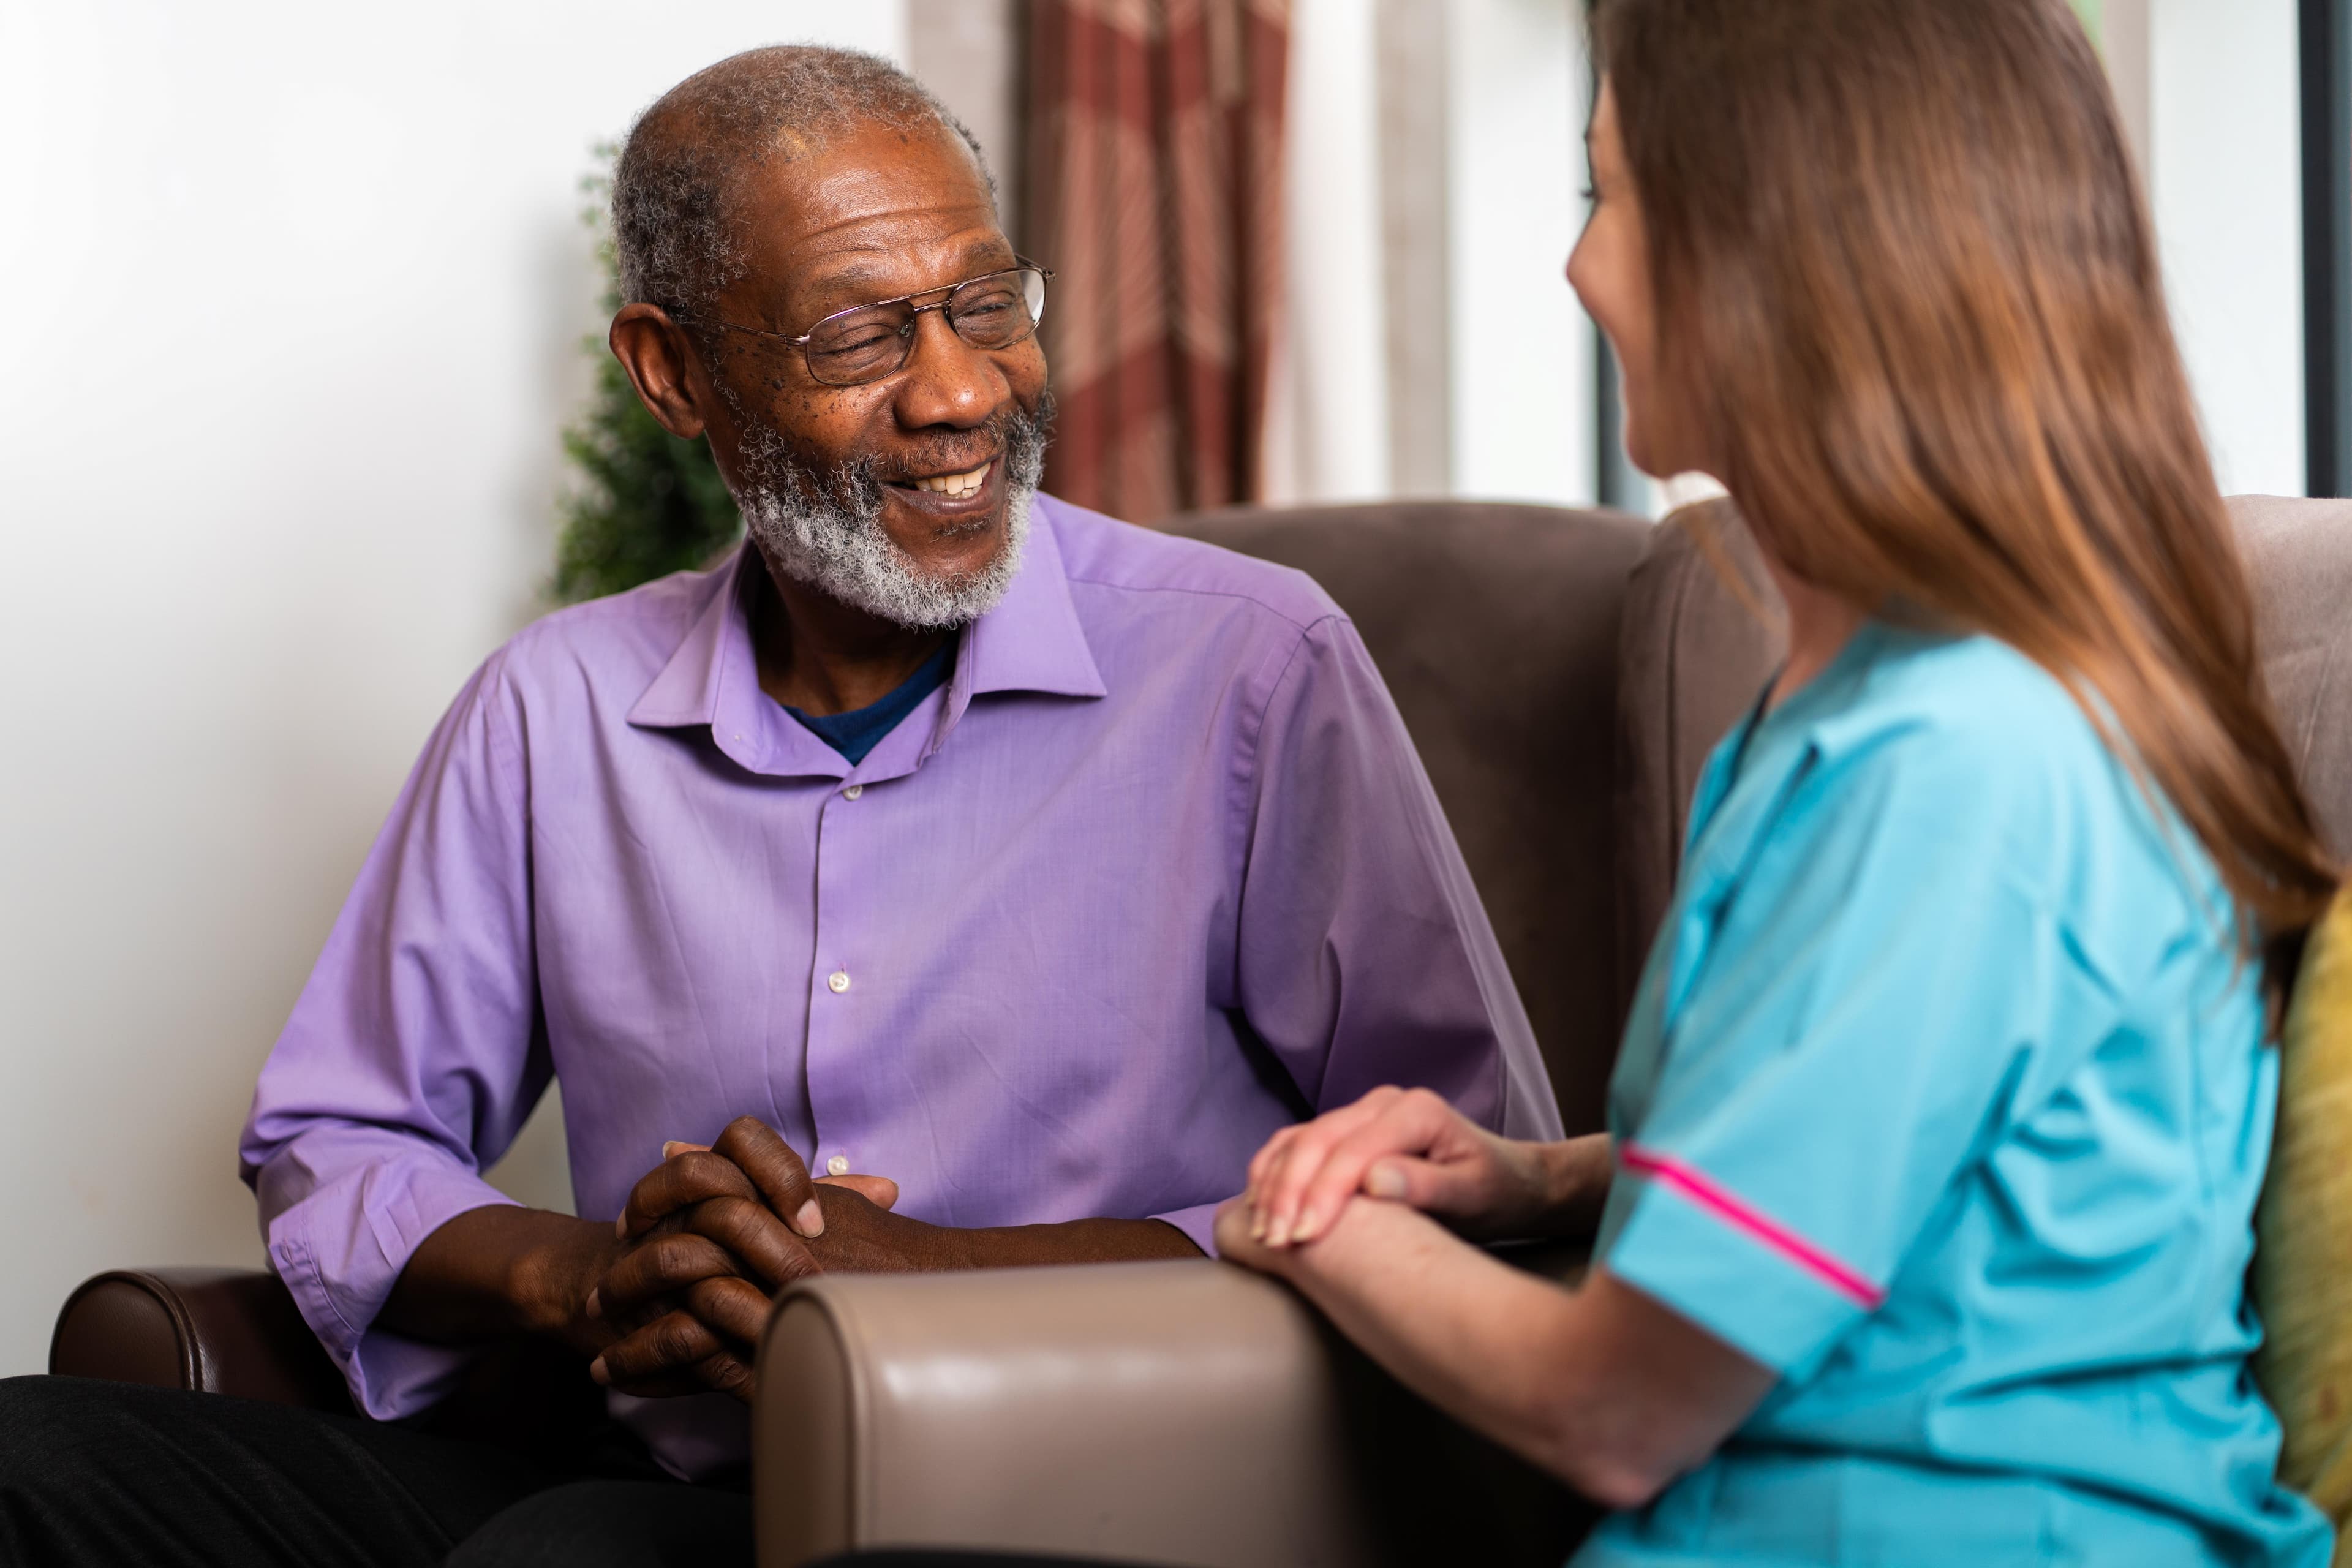 Male wearing pink shirt with grey hair speaking to female care assistant